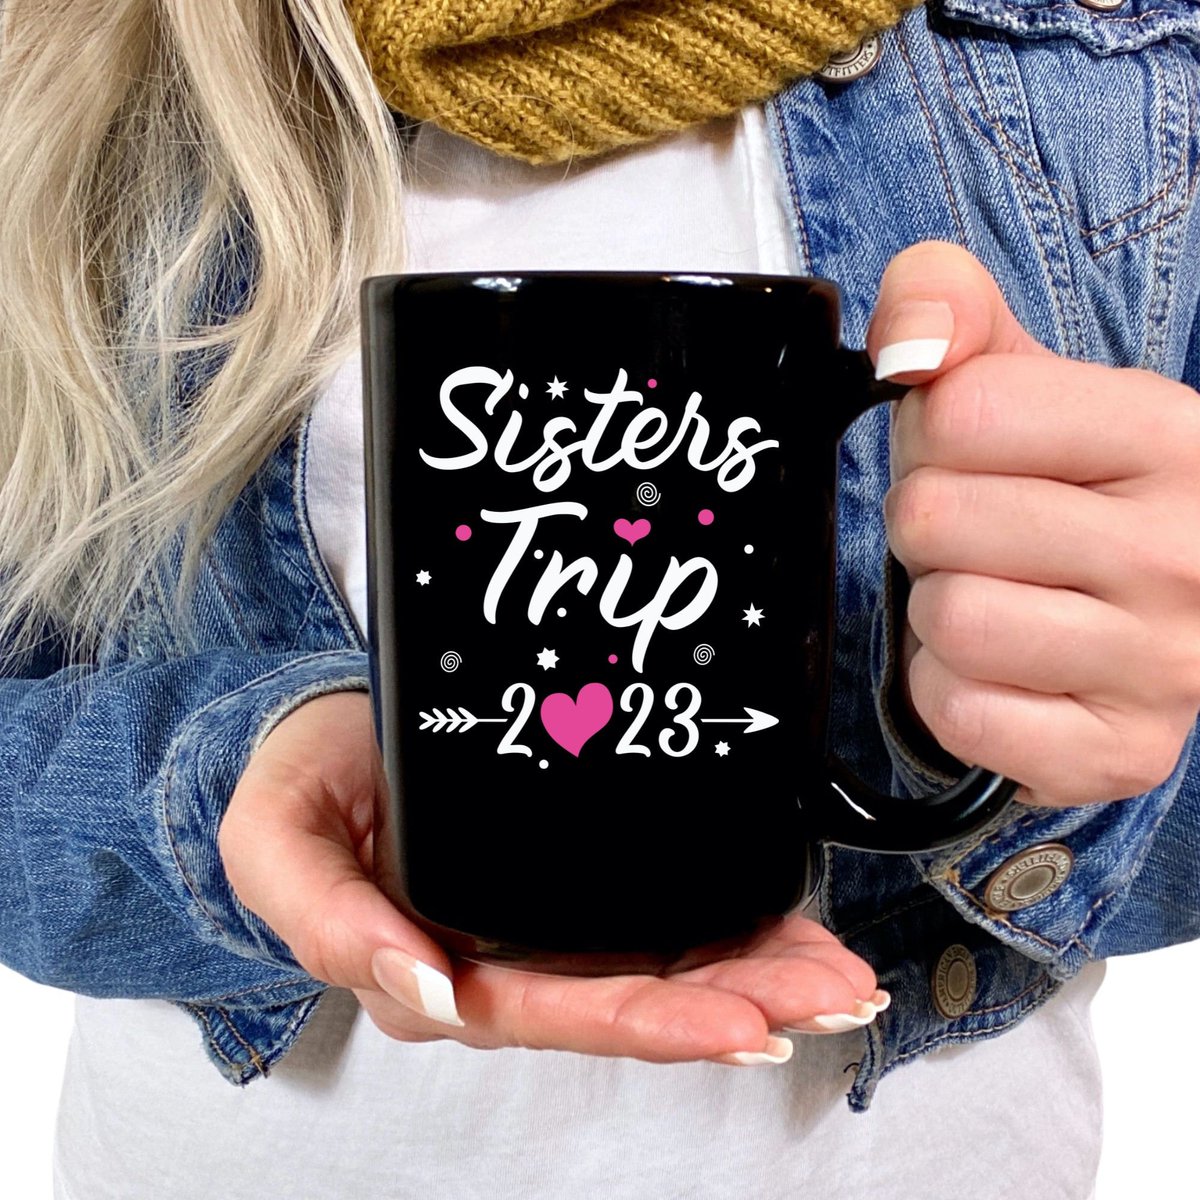 Have you ever had a sister trip that was so special and unforgettable that it needed to be marked forever? If so, what better way to commemorate it than with a unique souvenir coffee mug? ❤️ SAVE UP TO 50% OFF WHILE SUPPLIES LAST
etsy.me/3Hvv7Qy
#GiftForFriends #Gift